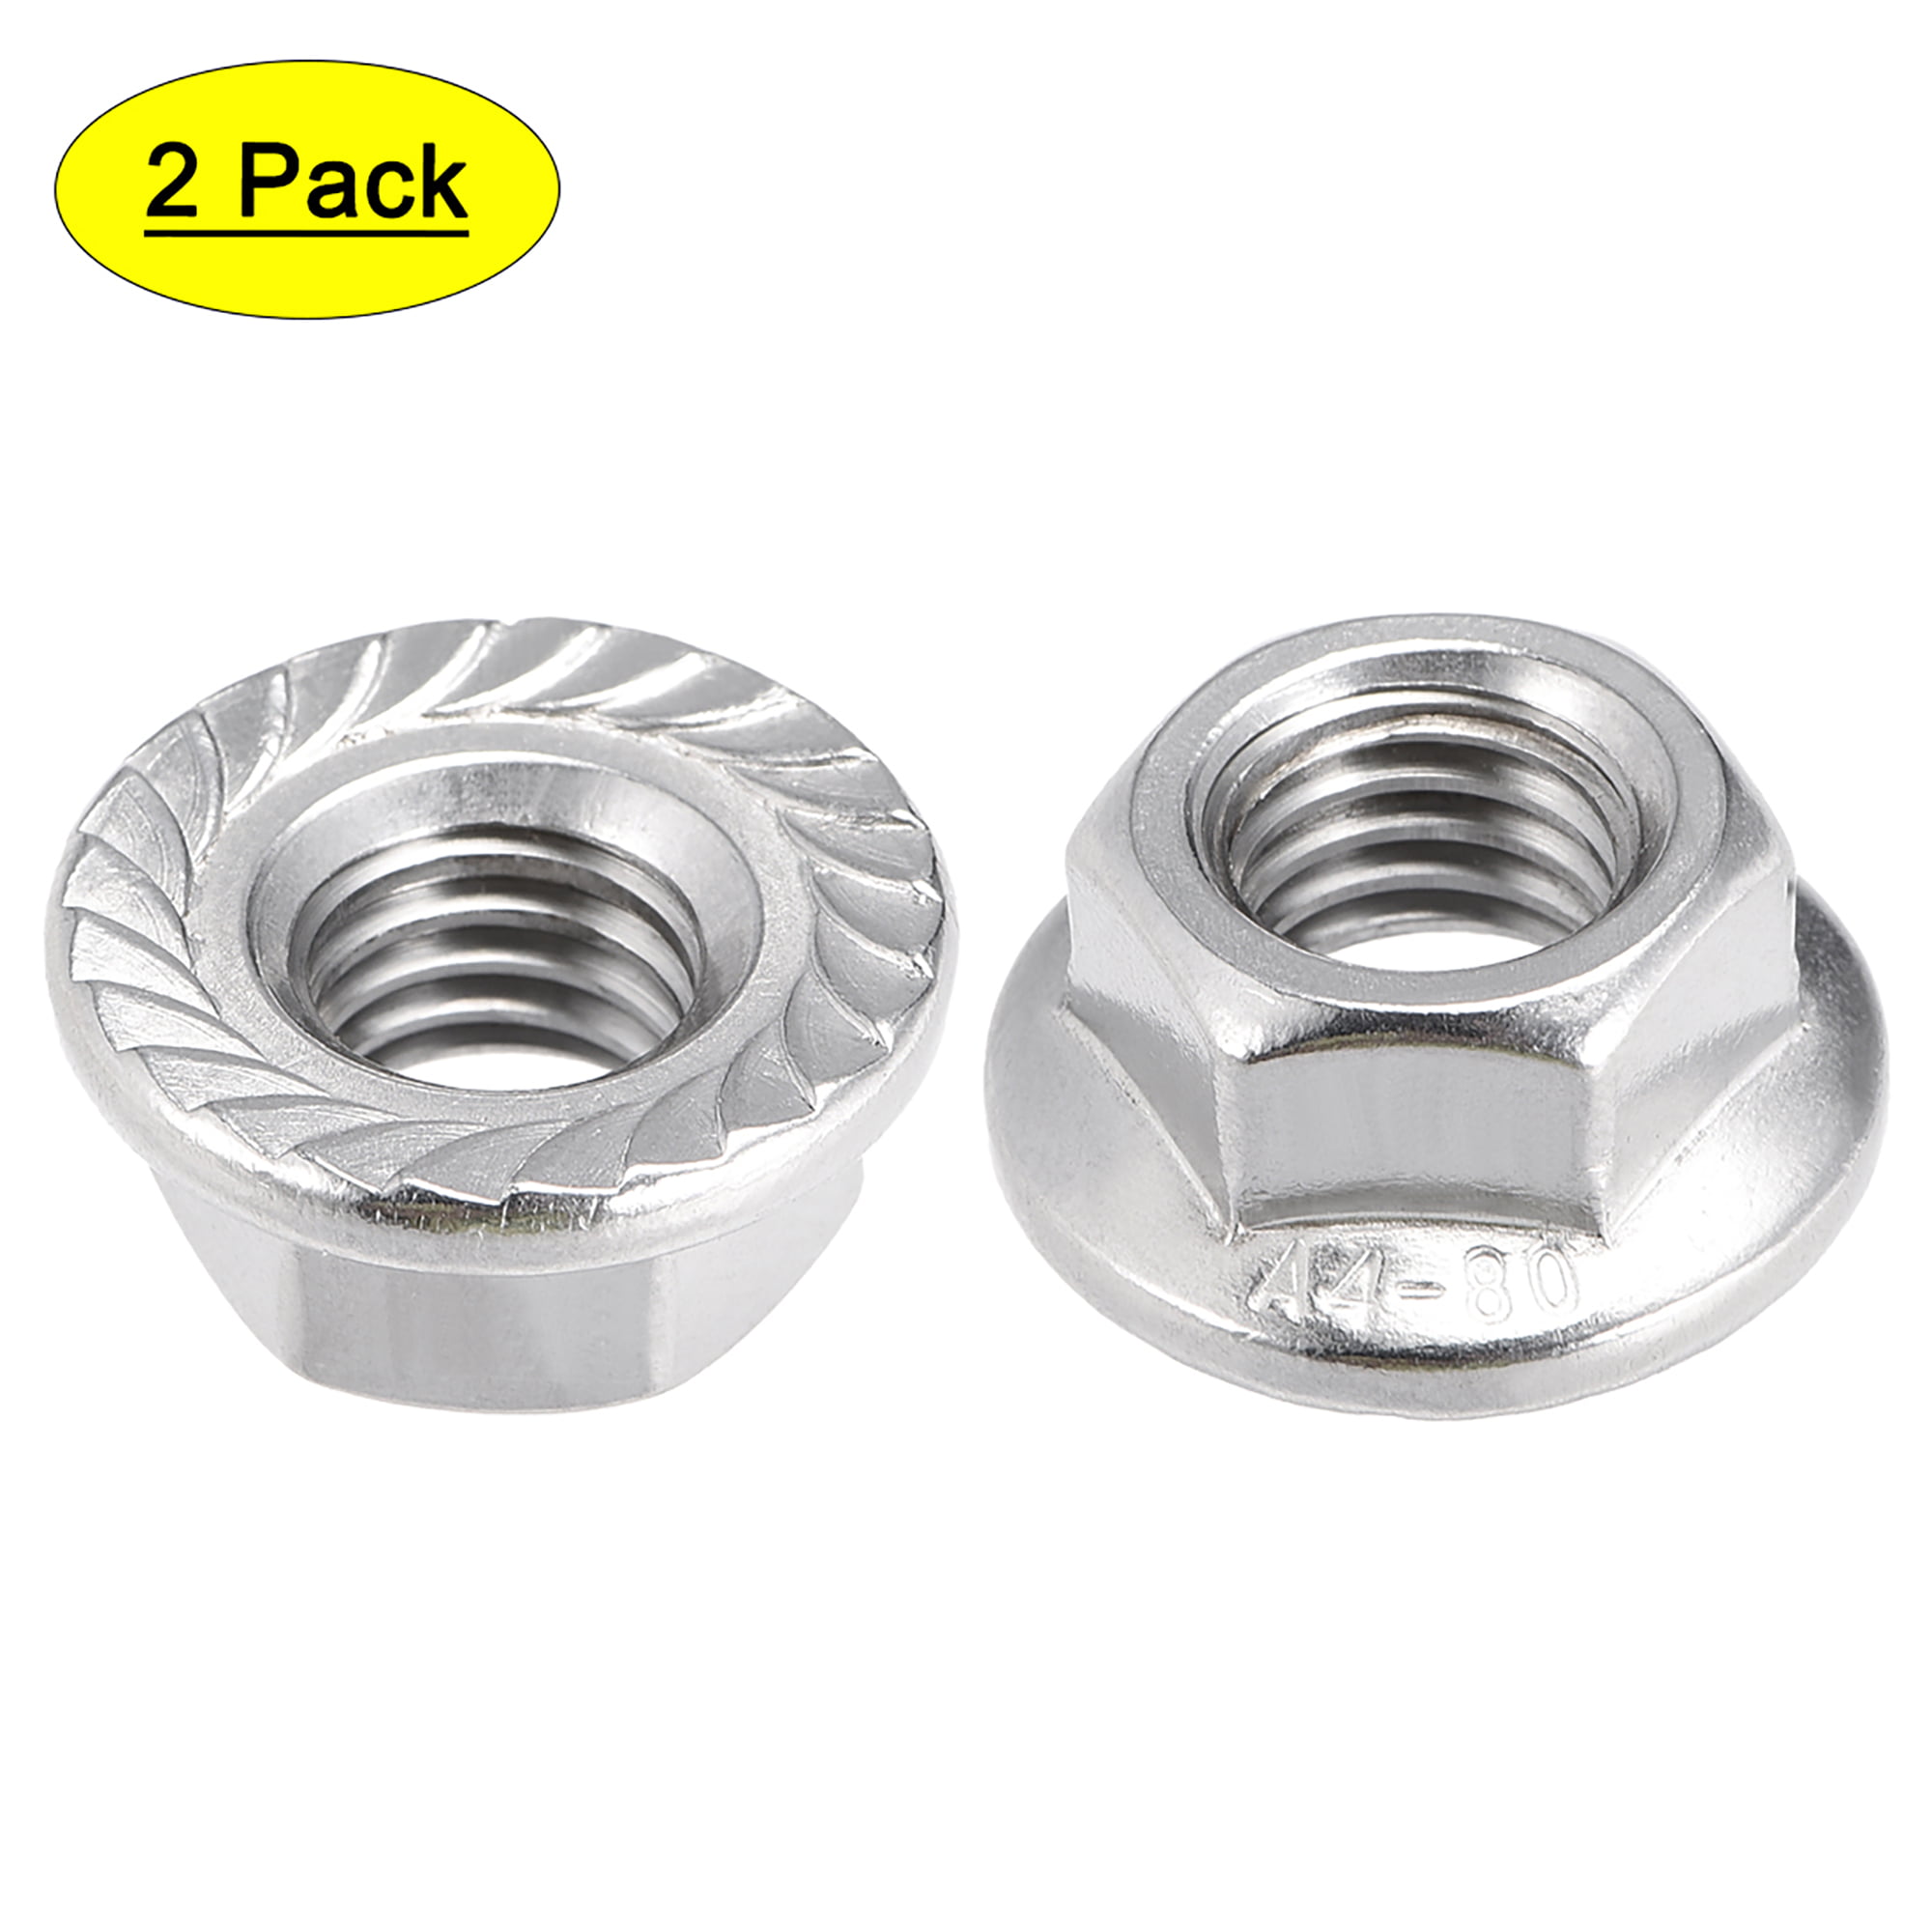 M10 Serrated Flange Hex Lock Nuts 316 Stainless Steel Pcs